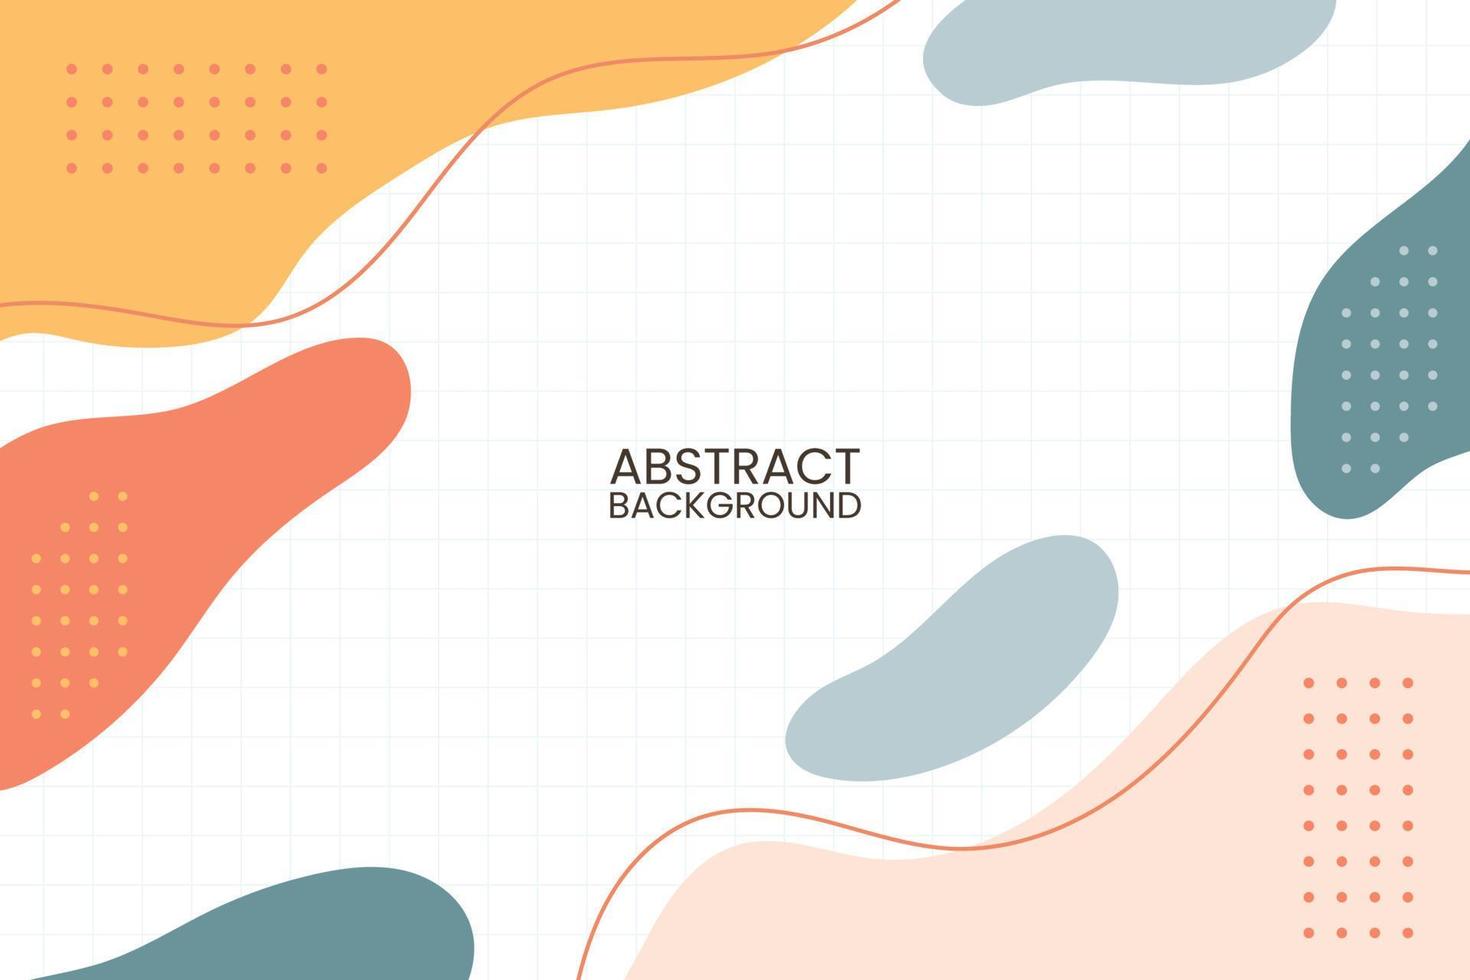 Modern colorful pastel gradient abstract shapes on memphis style background vector